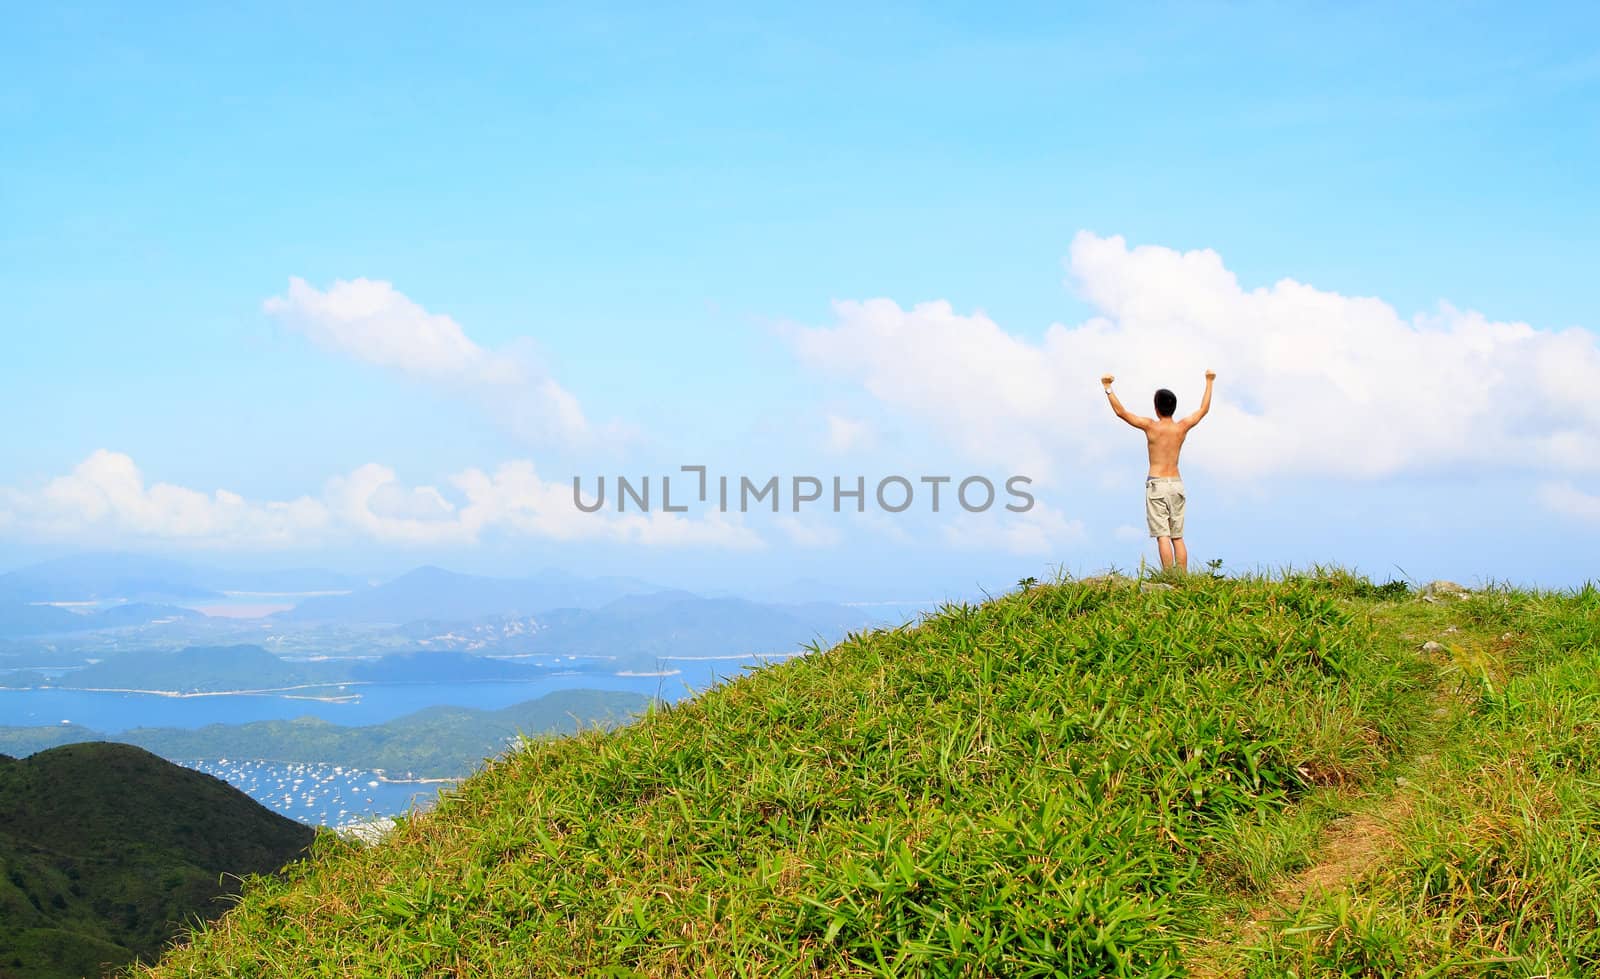 Beautiful mountains landscape with lake in hongkong and man on the top 